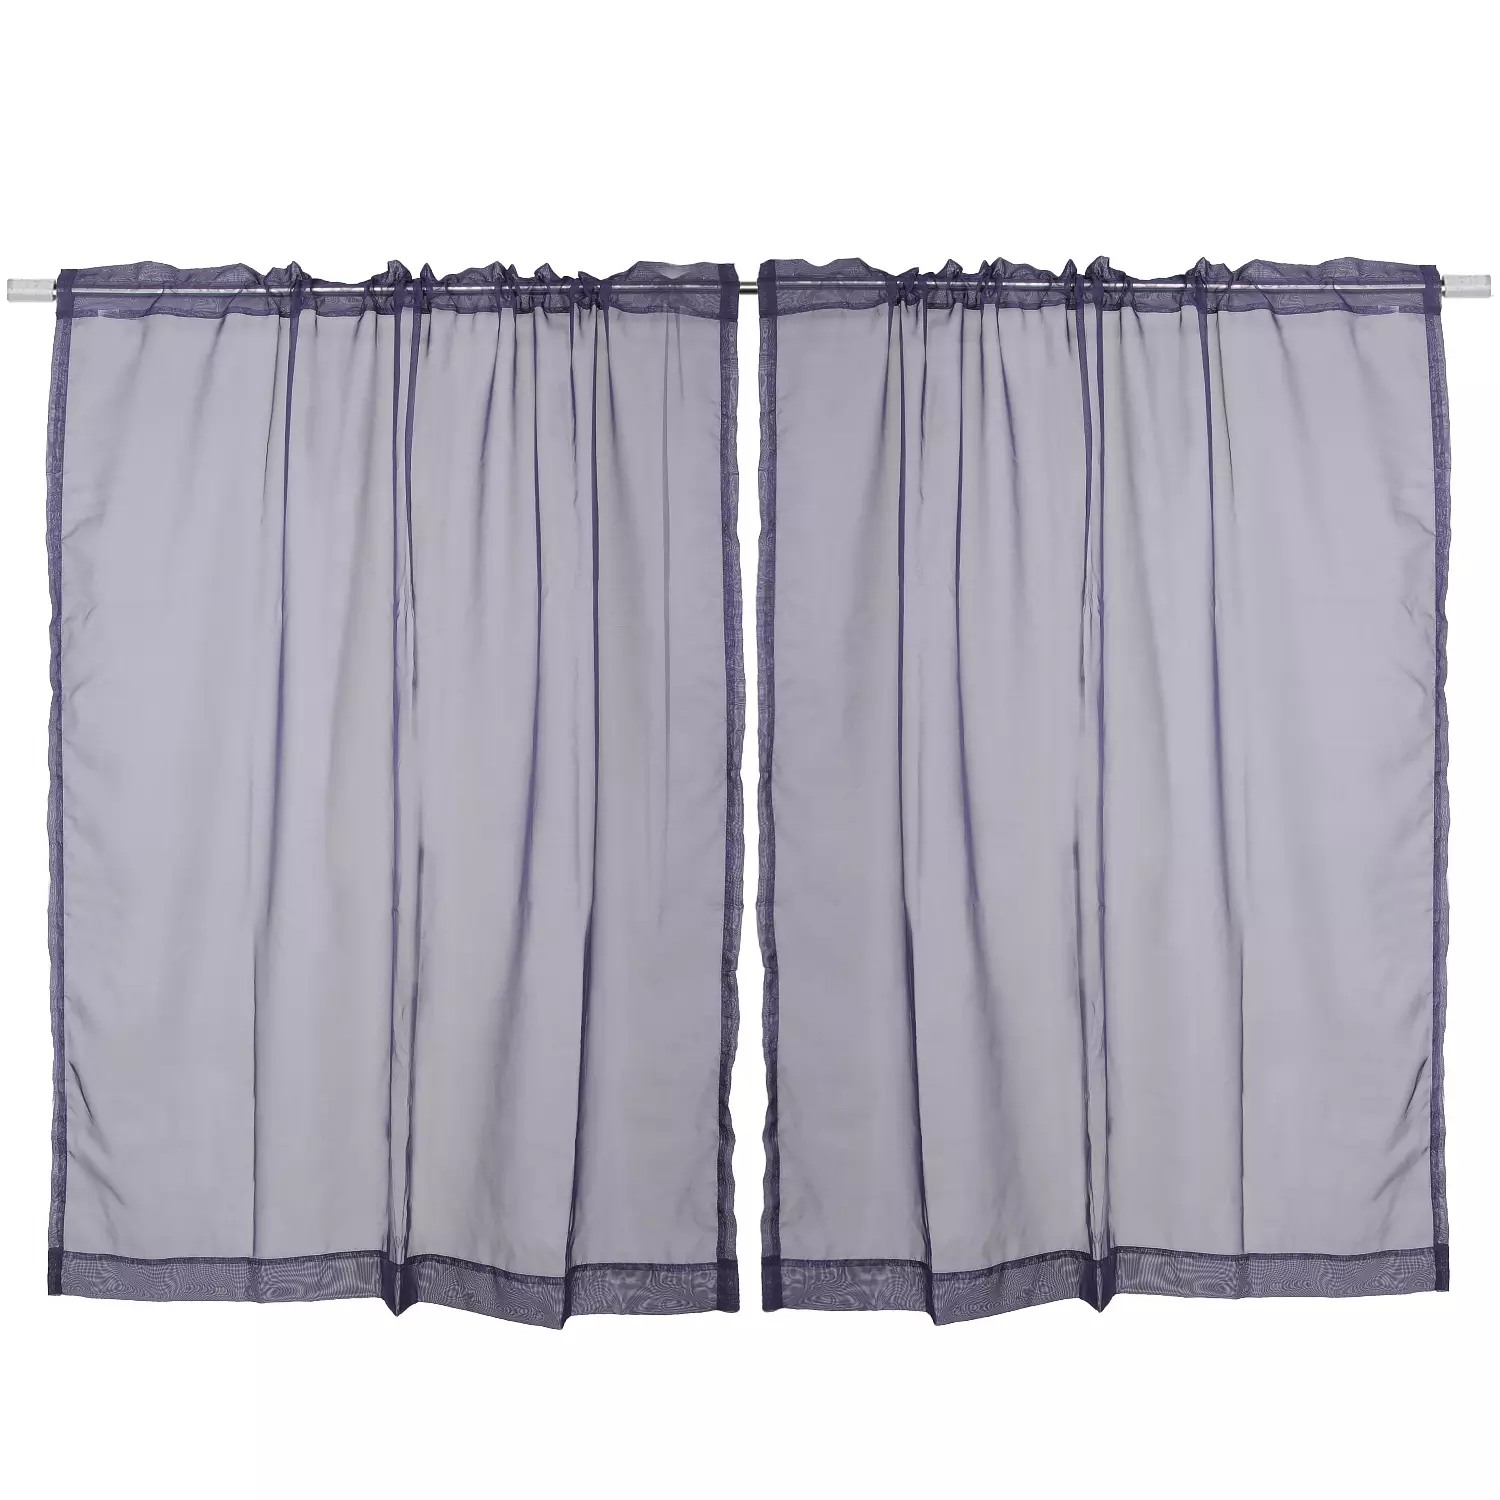 Two semi-sheer voile panels with rod pocket, 54"x63", navy